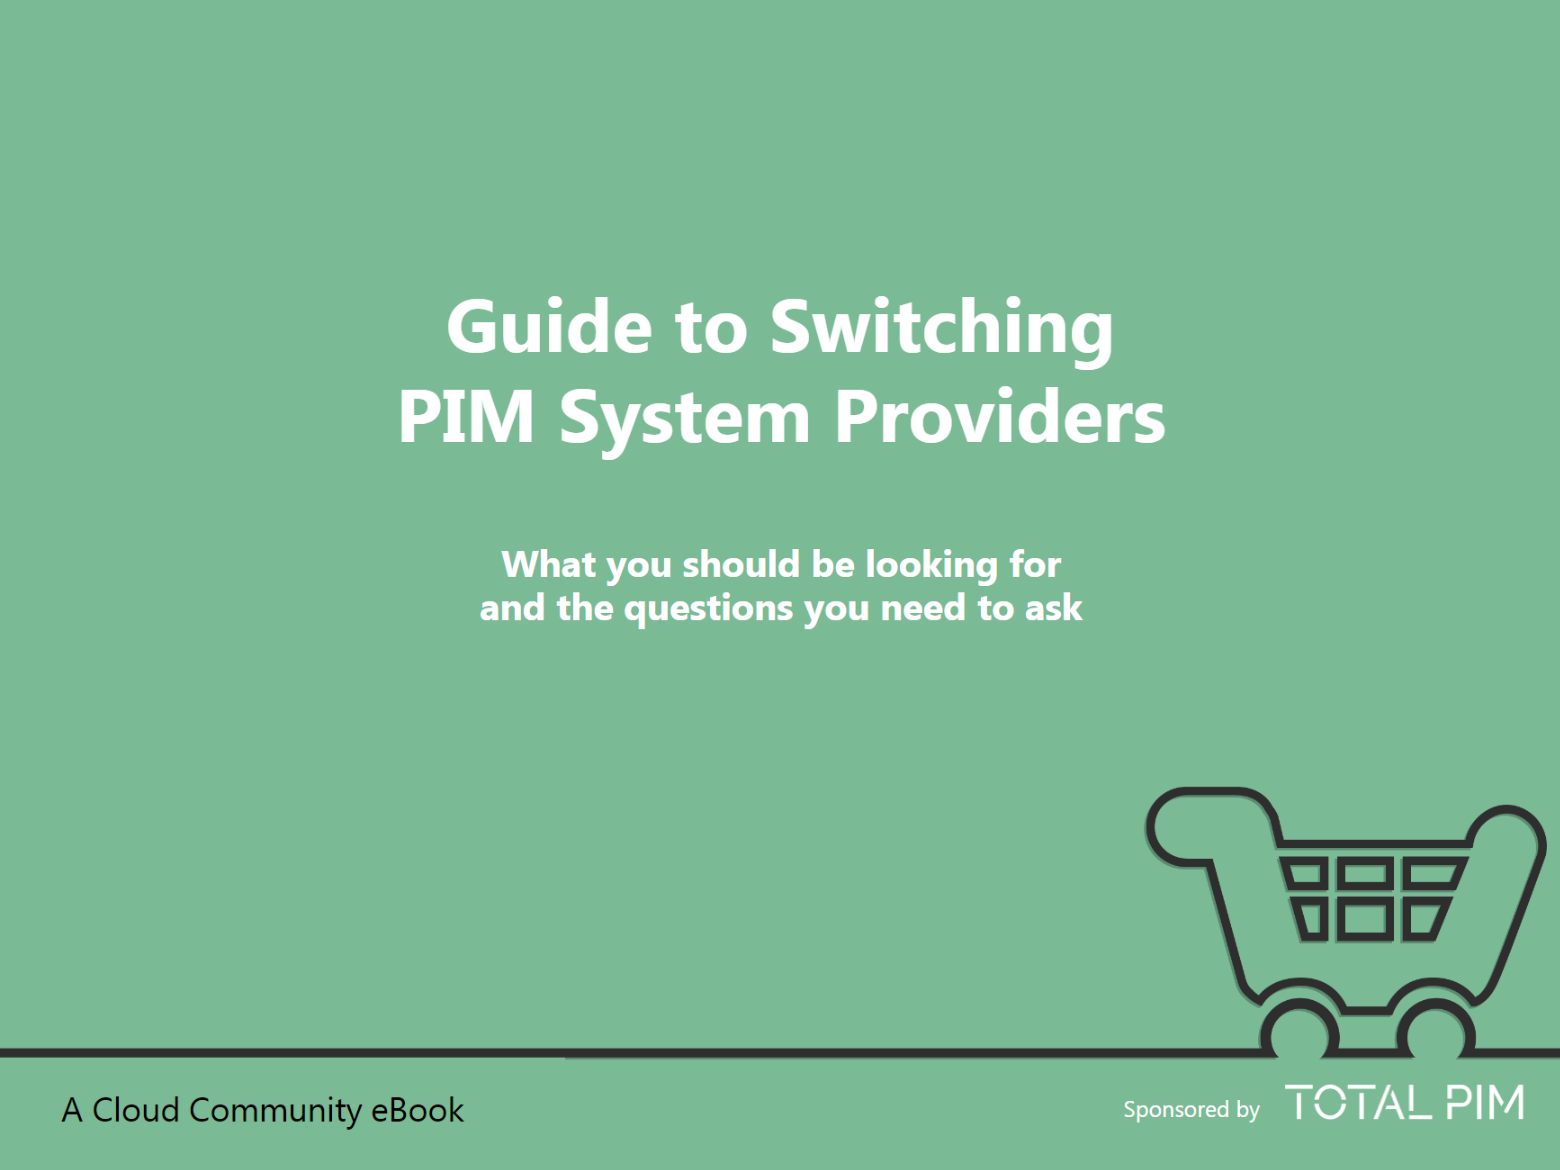 >Guide to switching PIM system providers